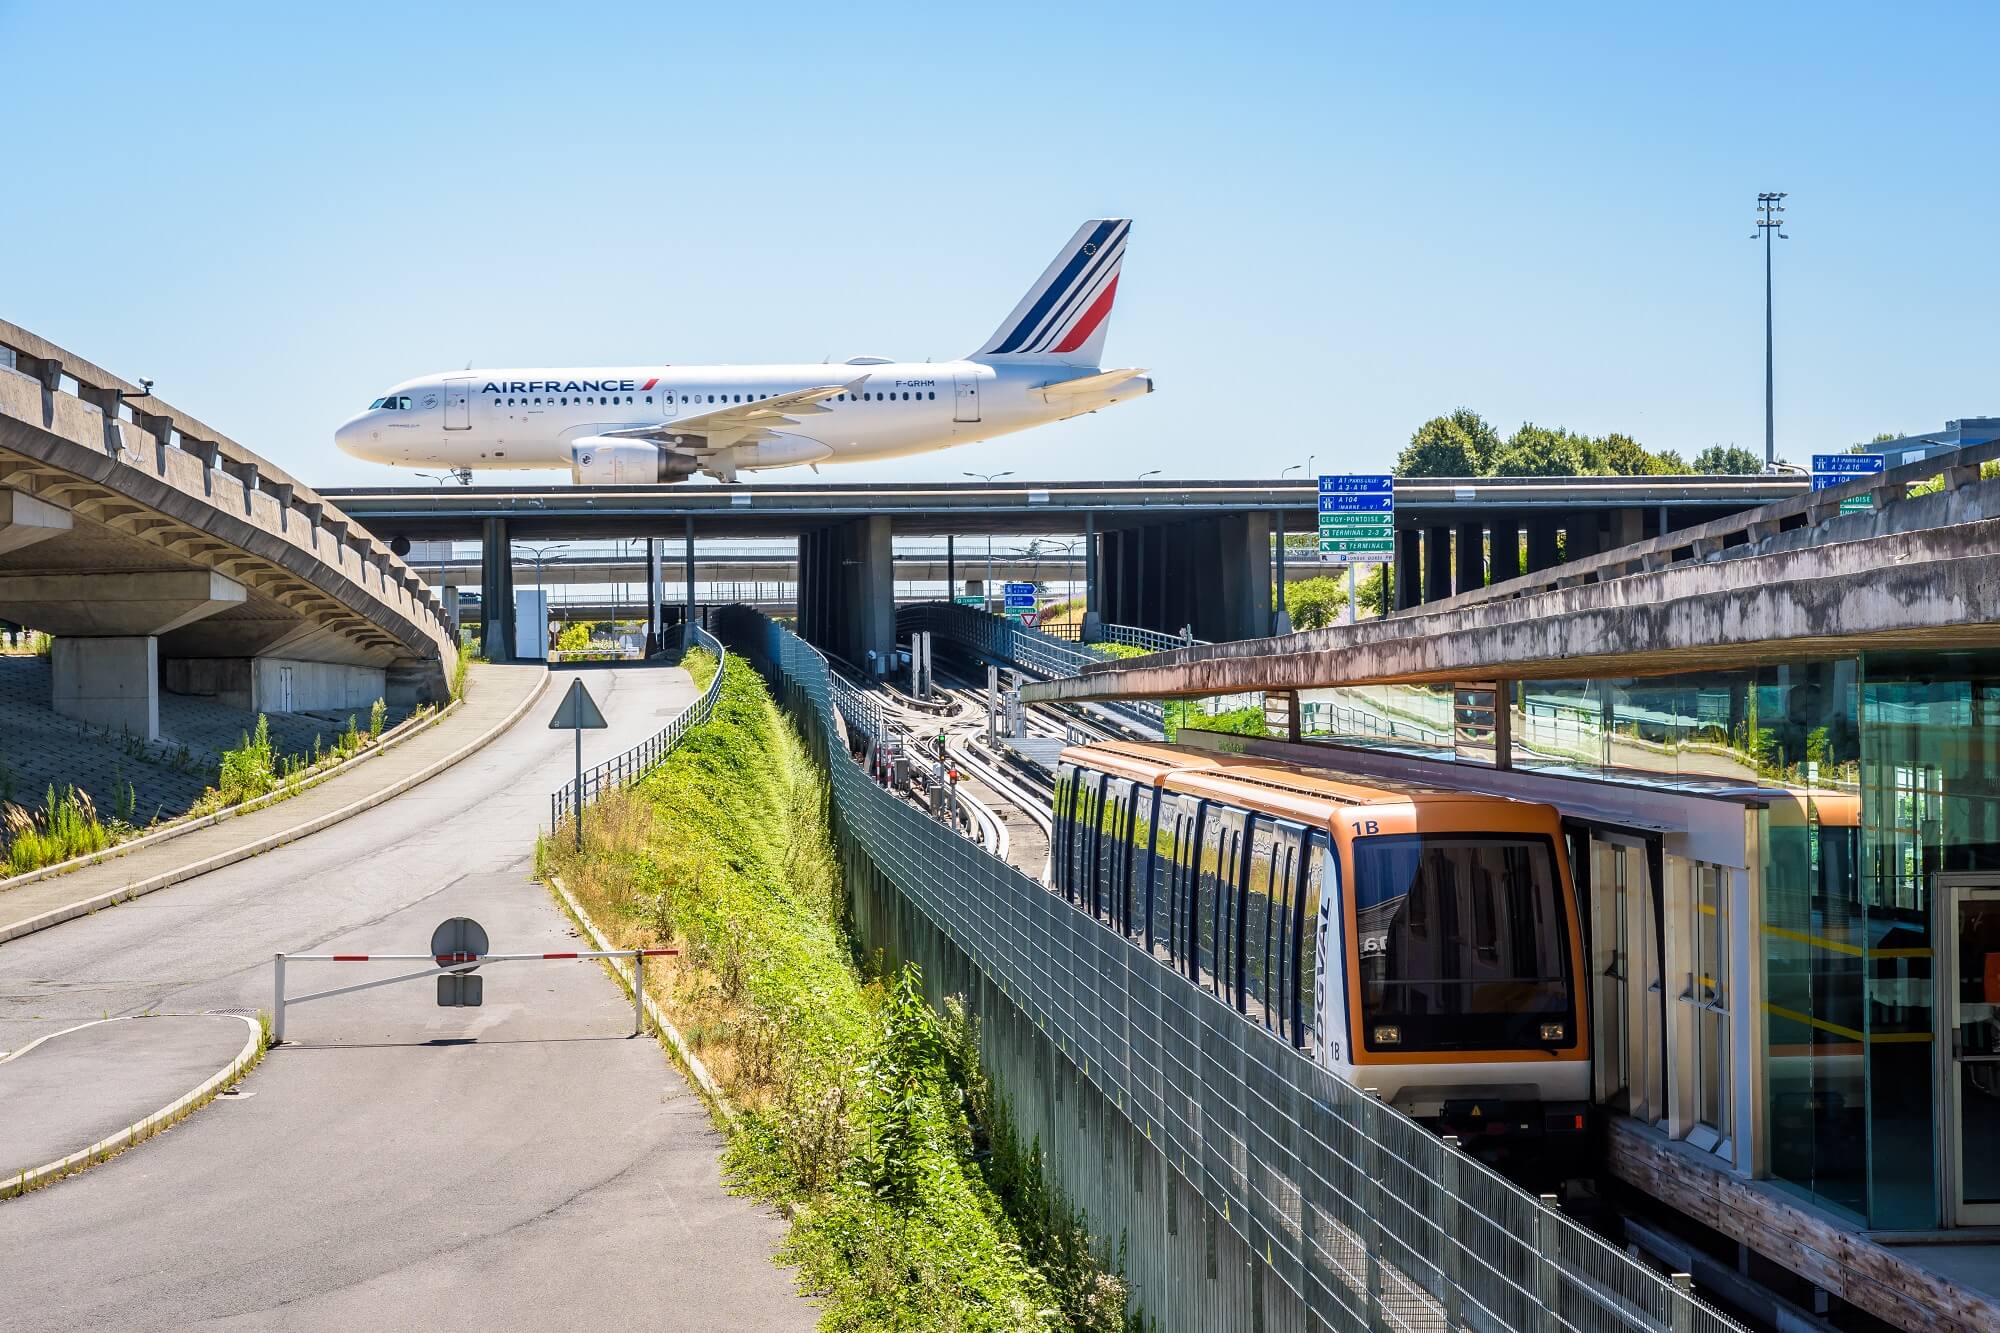 Paris-Charles de Gaulle expansion scrapped over environmental